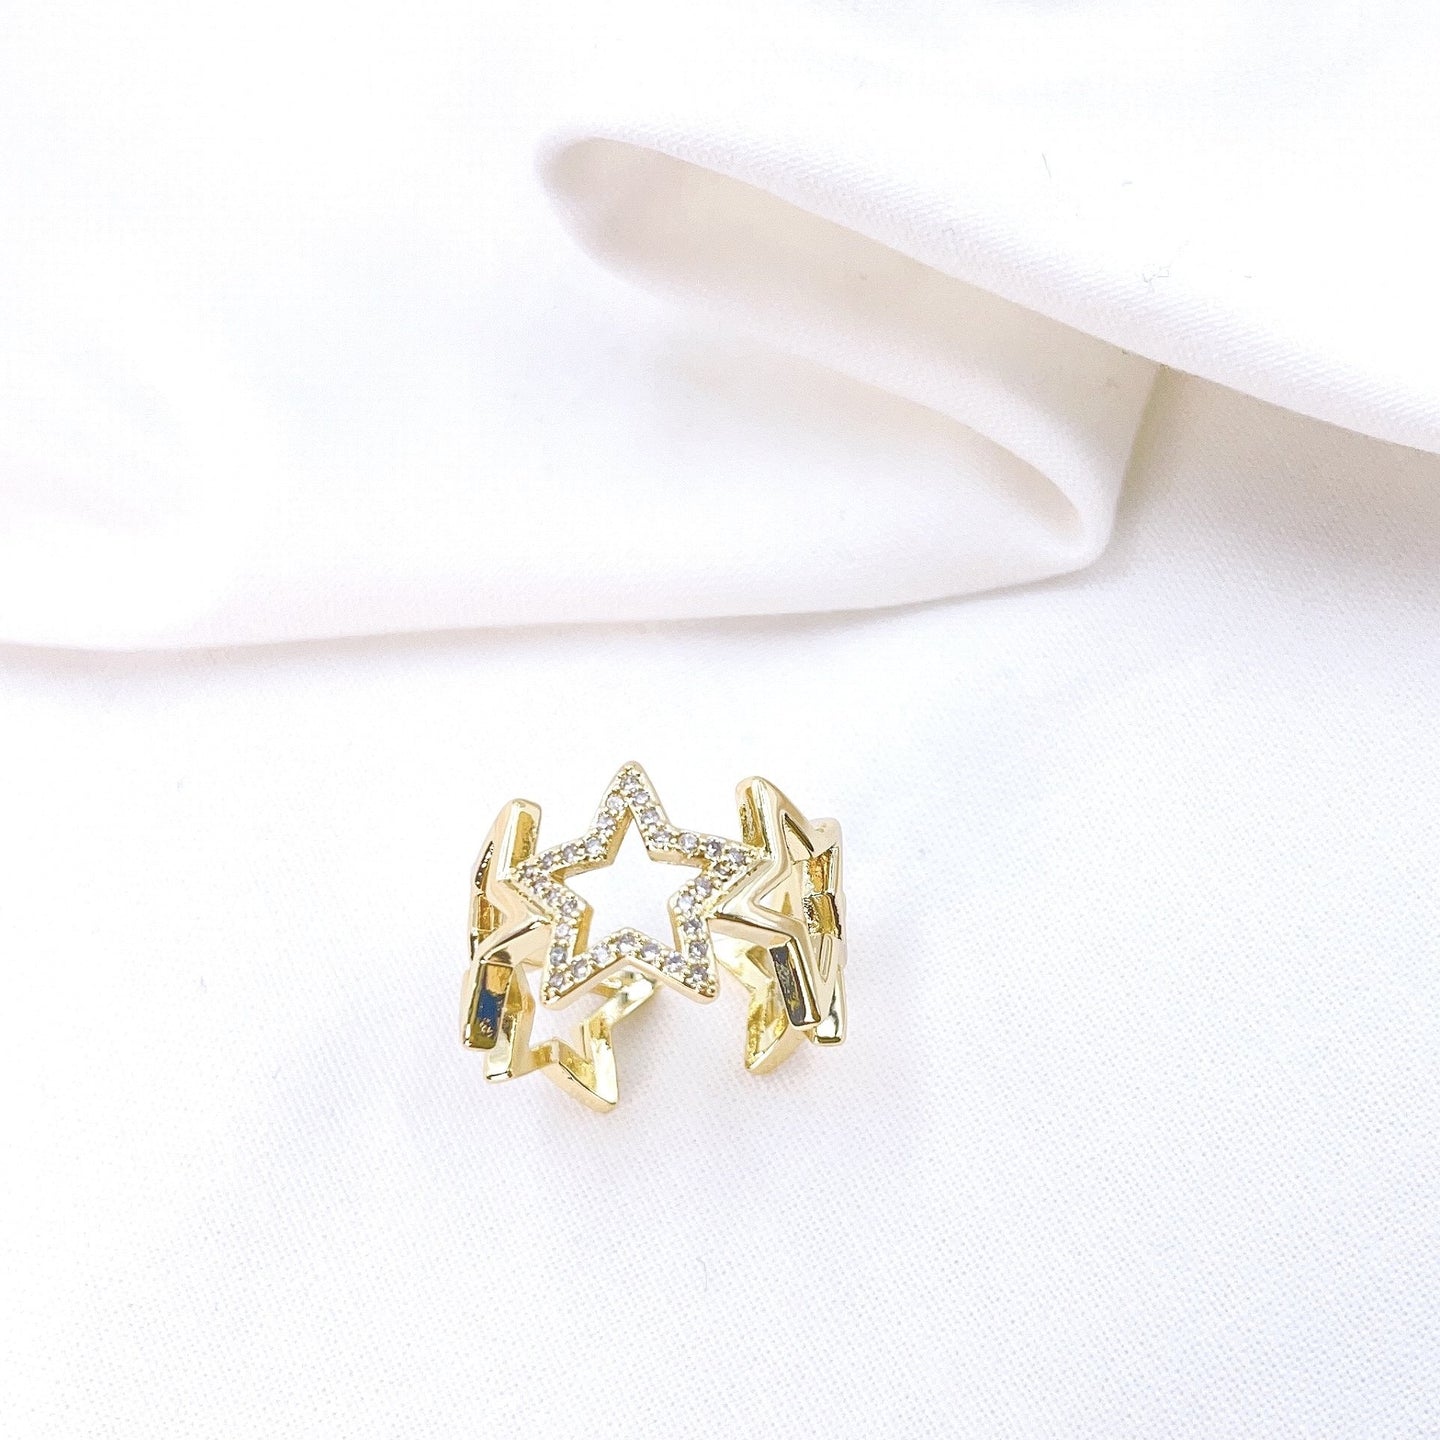 Adjustable Cut out Star Ring. Gold plated ring. Center star adorned with CZ crystals. Lucky Birds - The Valerie Collection. 